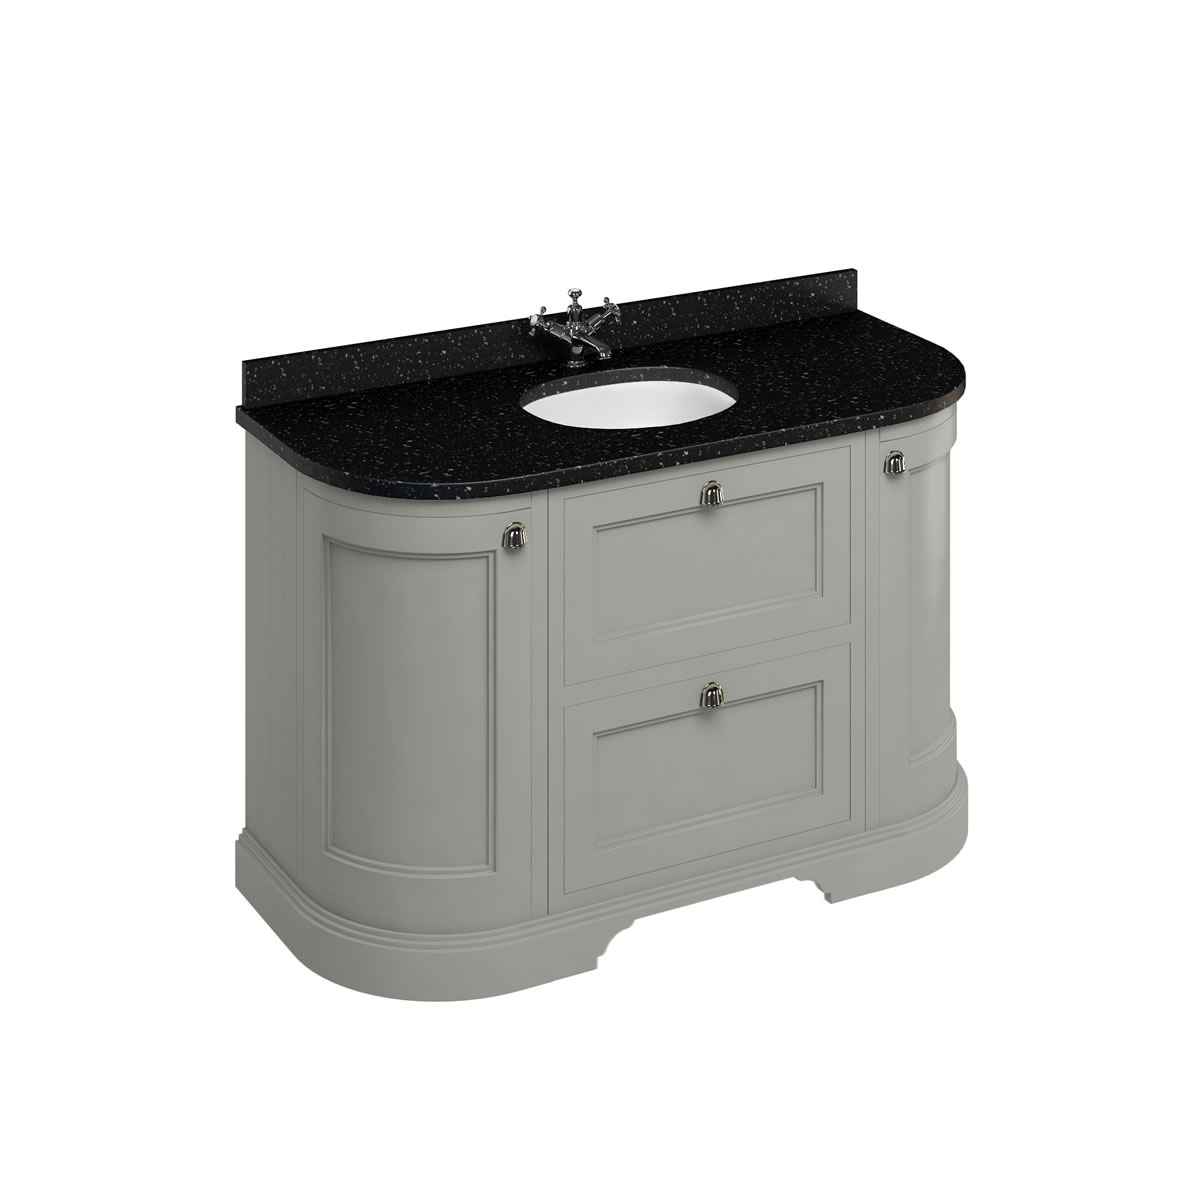 Freestanding 134 Curved Vanity Unit with drawers - Dark Olive and Minerva black granite worktop with integrated white basin